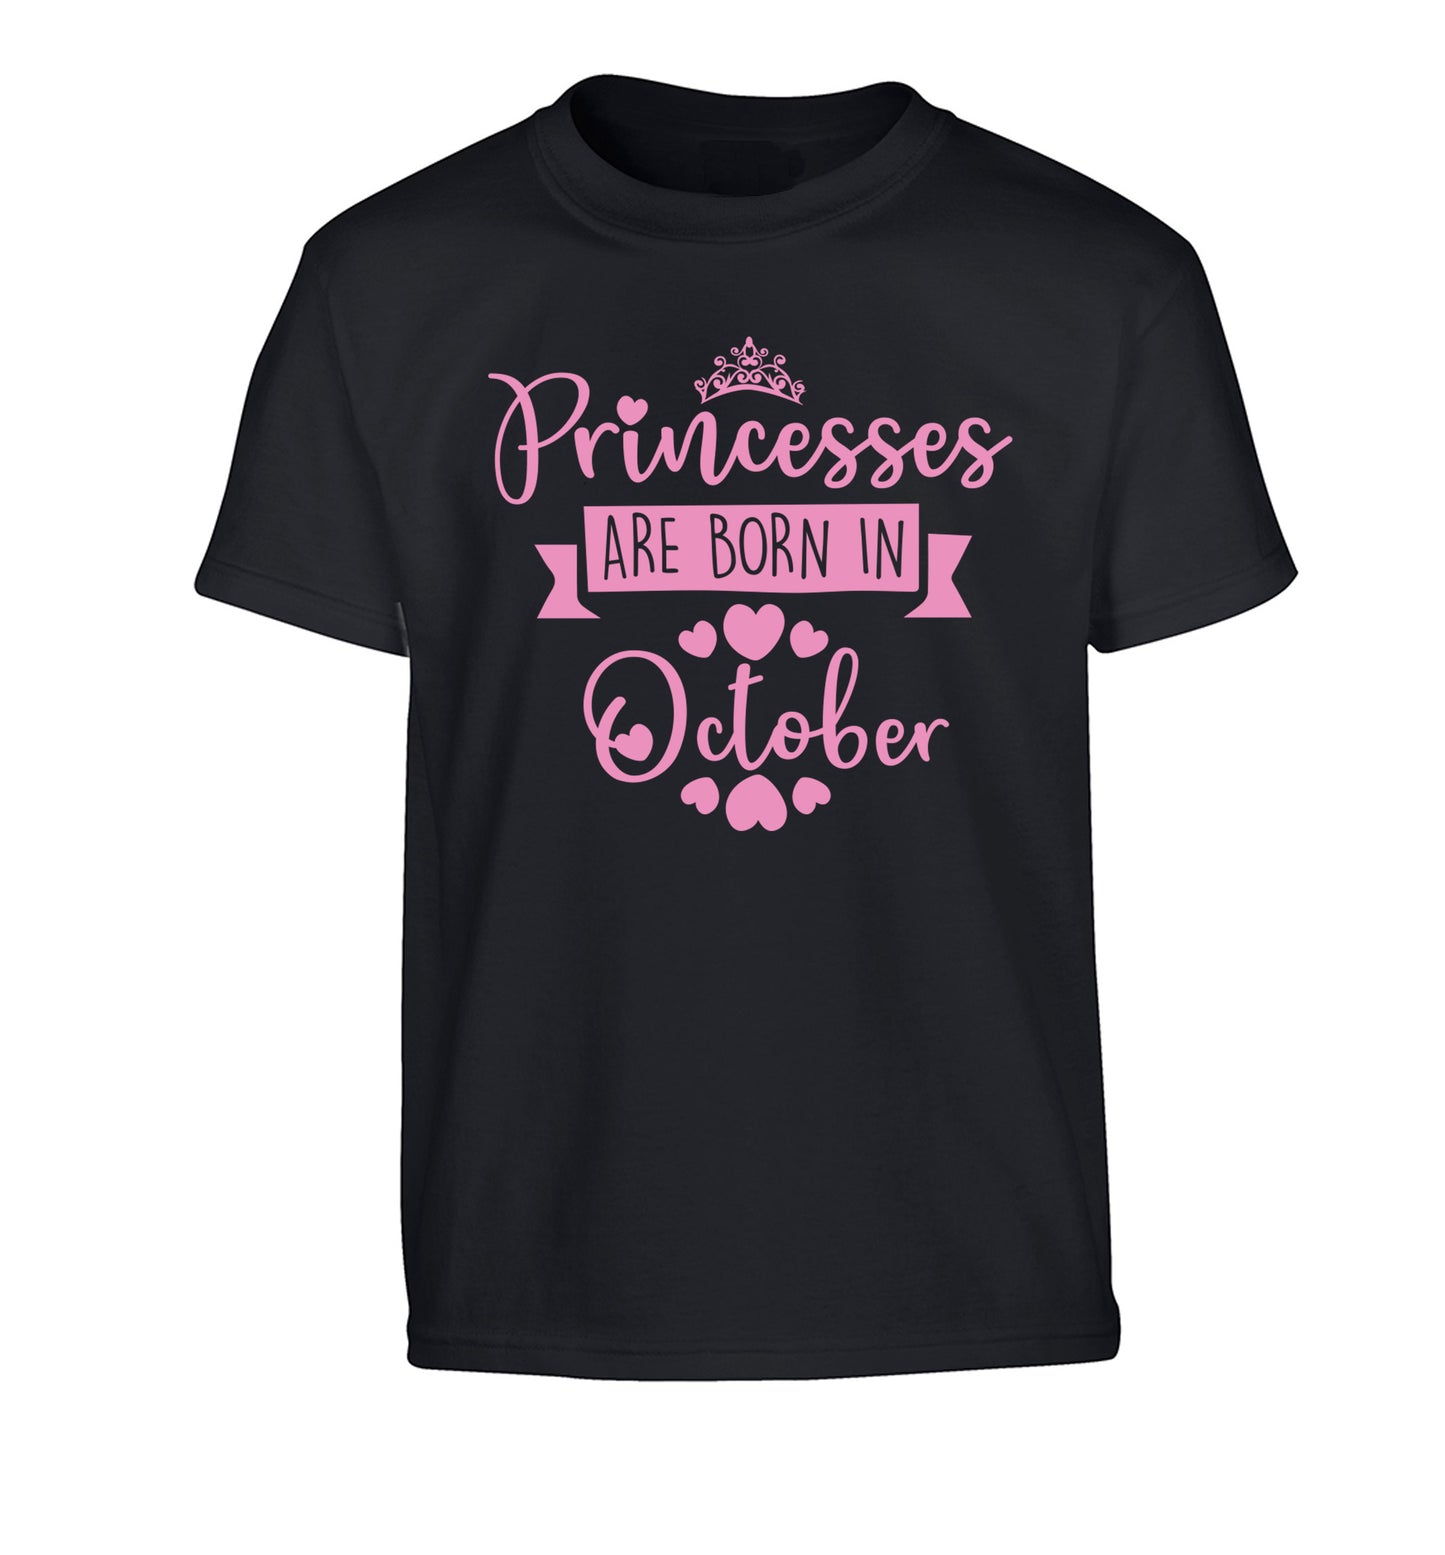 Princesses are born in October Children's black Tshirt 12-13 Years